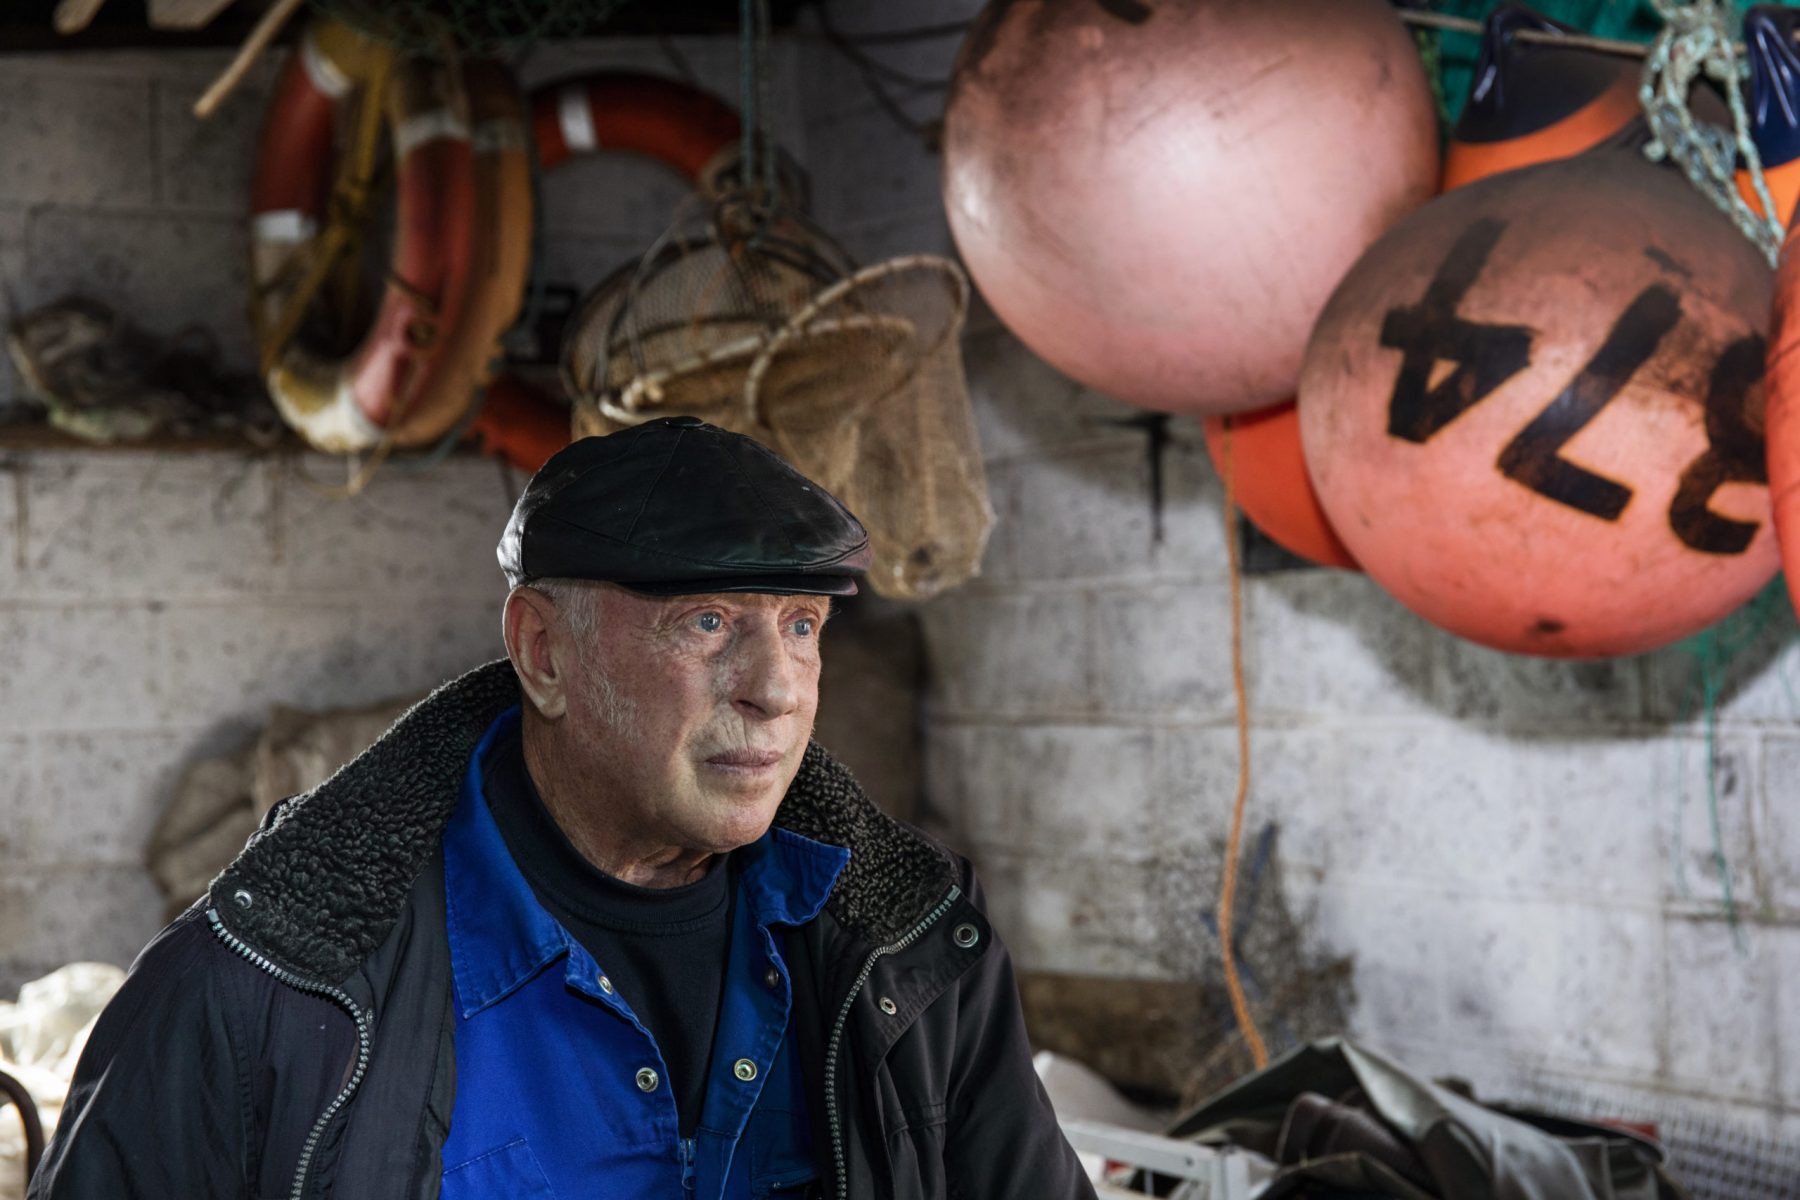 Paul Joy, fishermen from generations of fishermen based in Hastings wants to leave the EU